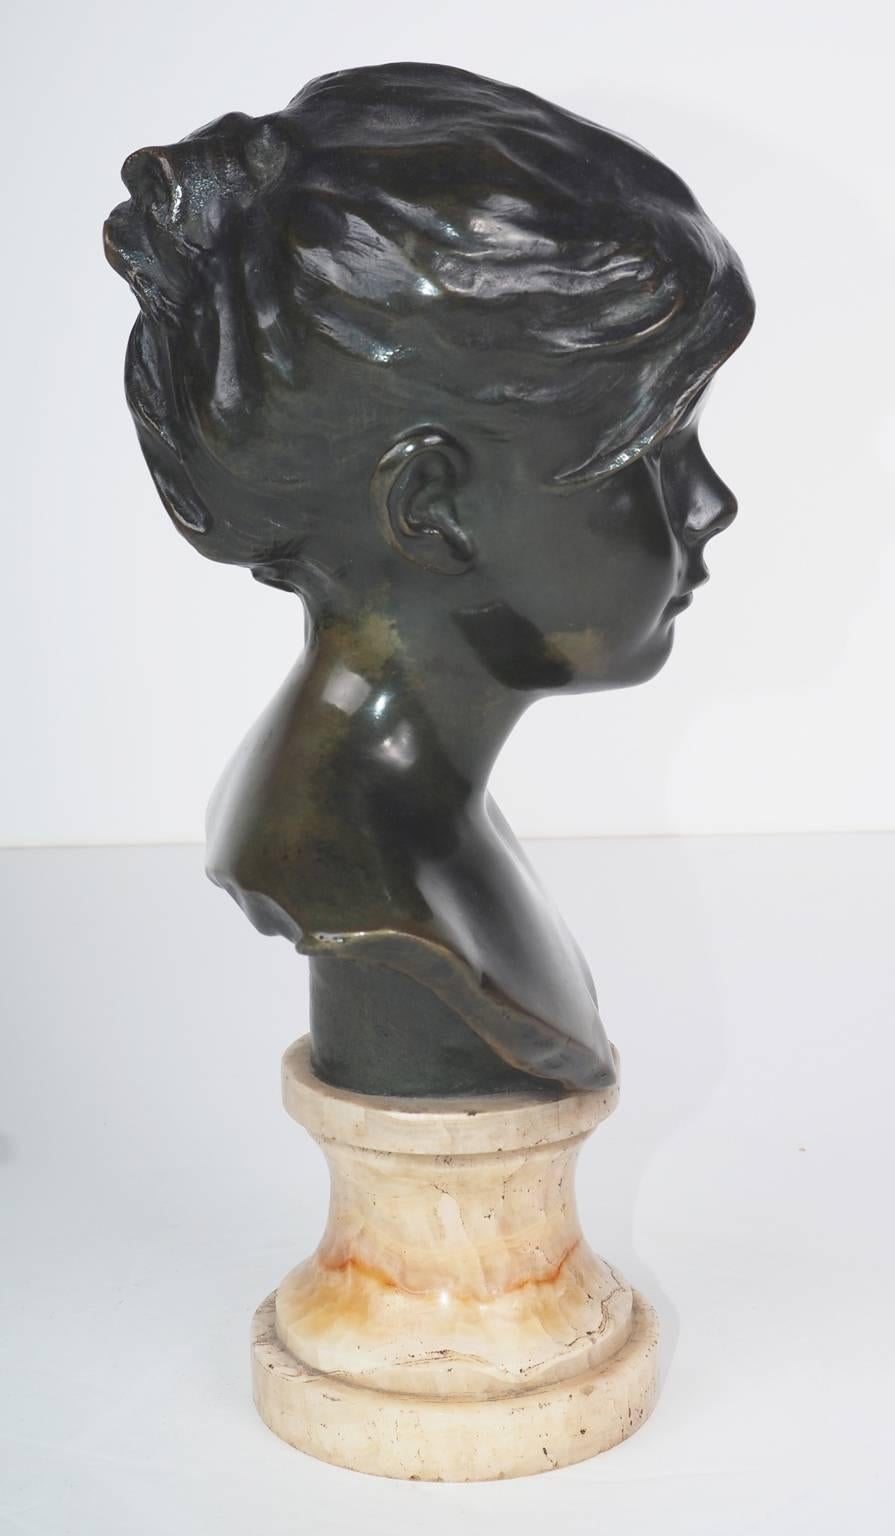 Fine bust of a young girl in a realistic style with a deep green patina.